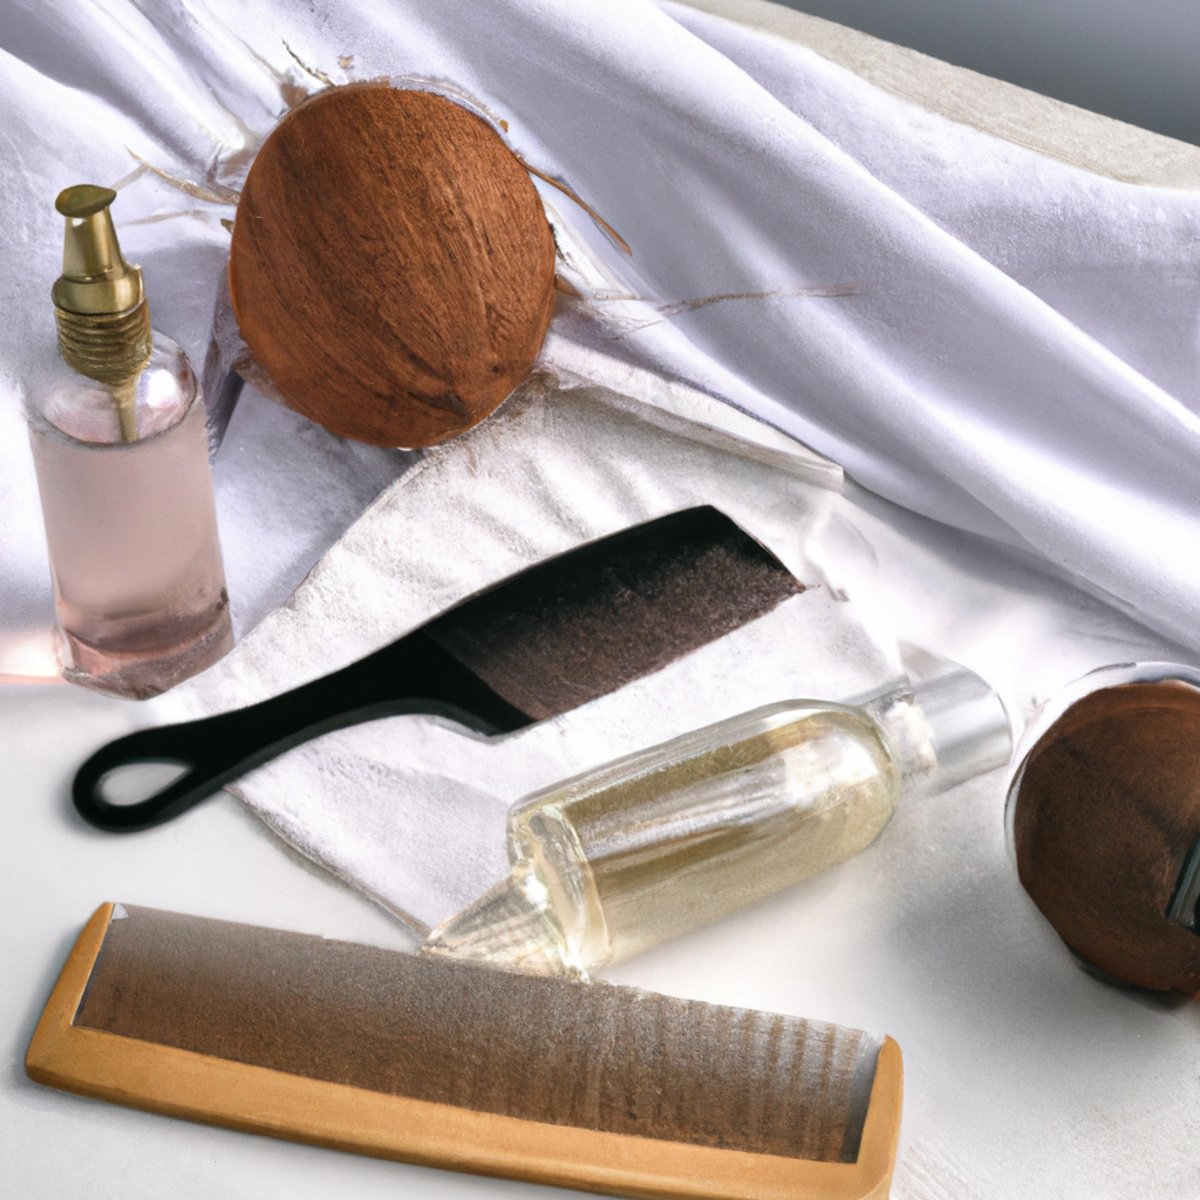 How to promote hair growth naturally - A natural hair care setup with a wooden hairbrush, wide-tooth comb, spray bottle, coconut oil jar, and satin hair bonnet.